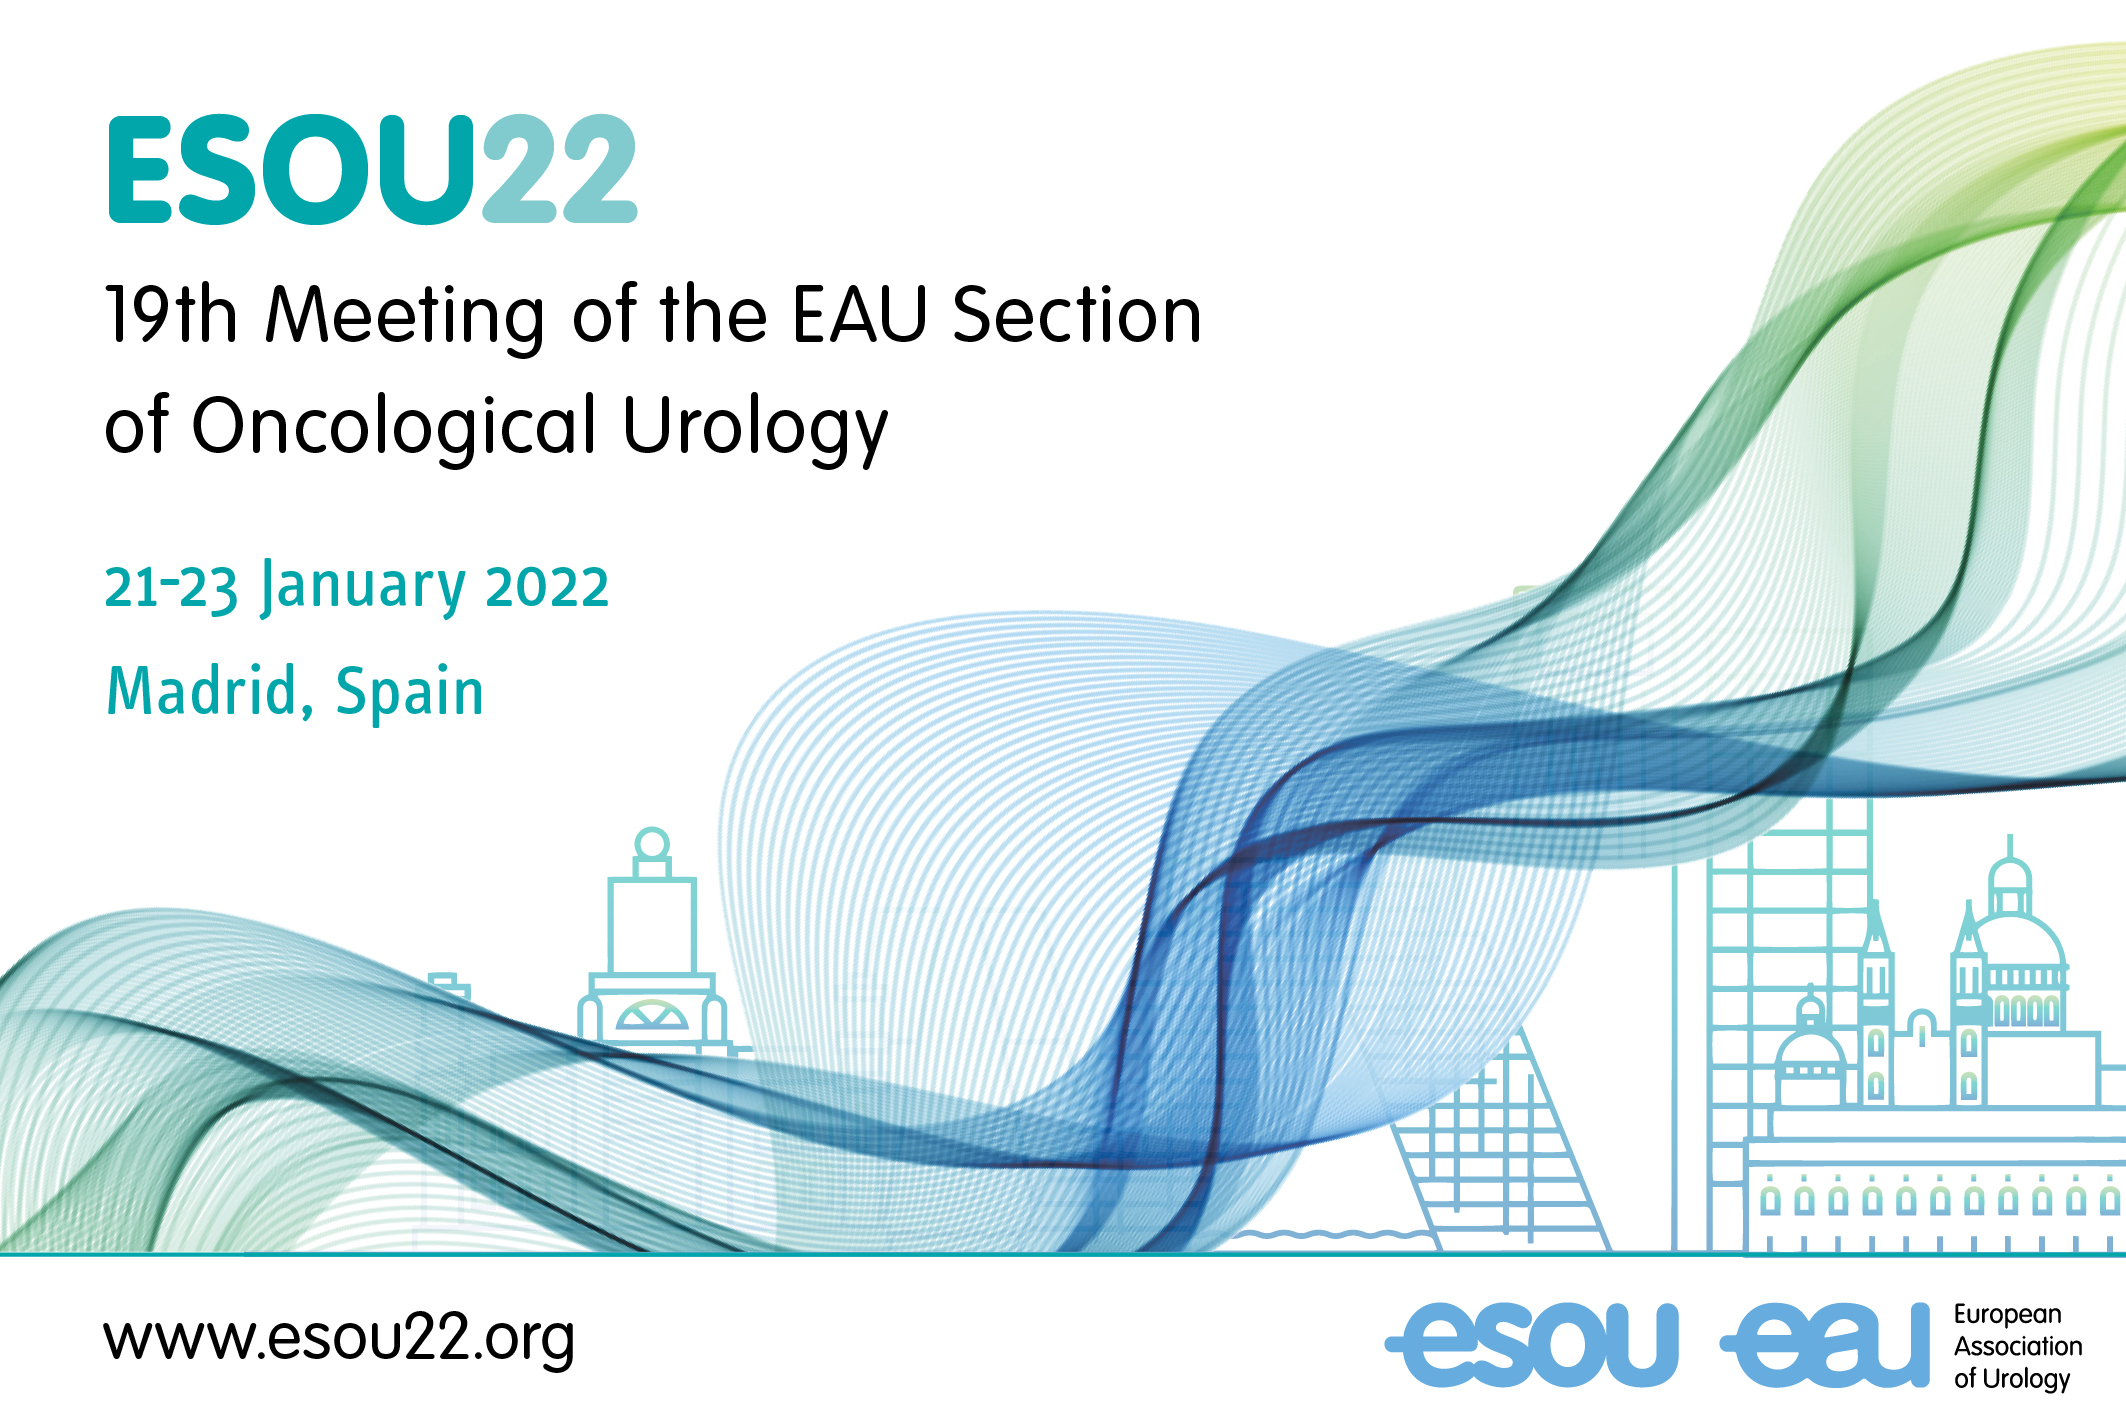 19th Meeting of the EAU Section of Oncological Urology (ESOU22)